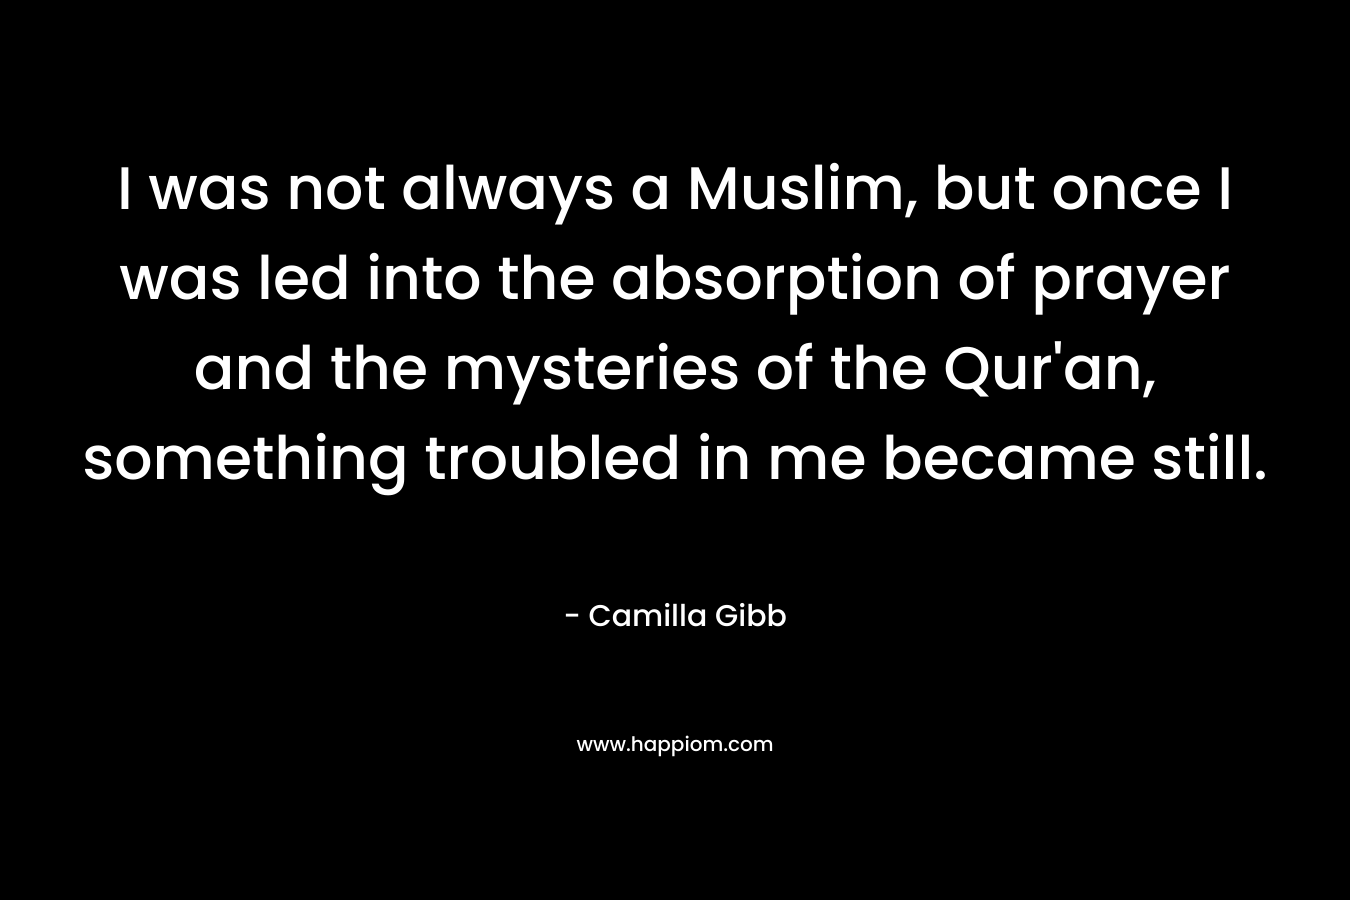 I was not always a Muslim, but once I was led into the absorption of prayer and the mysteries of the Qur’an, something troubled in me became still. – Camilla Gibb